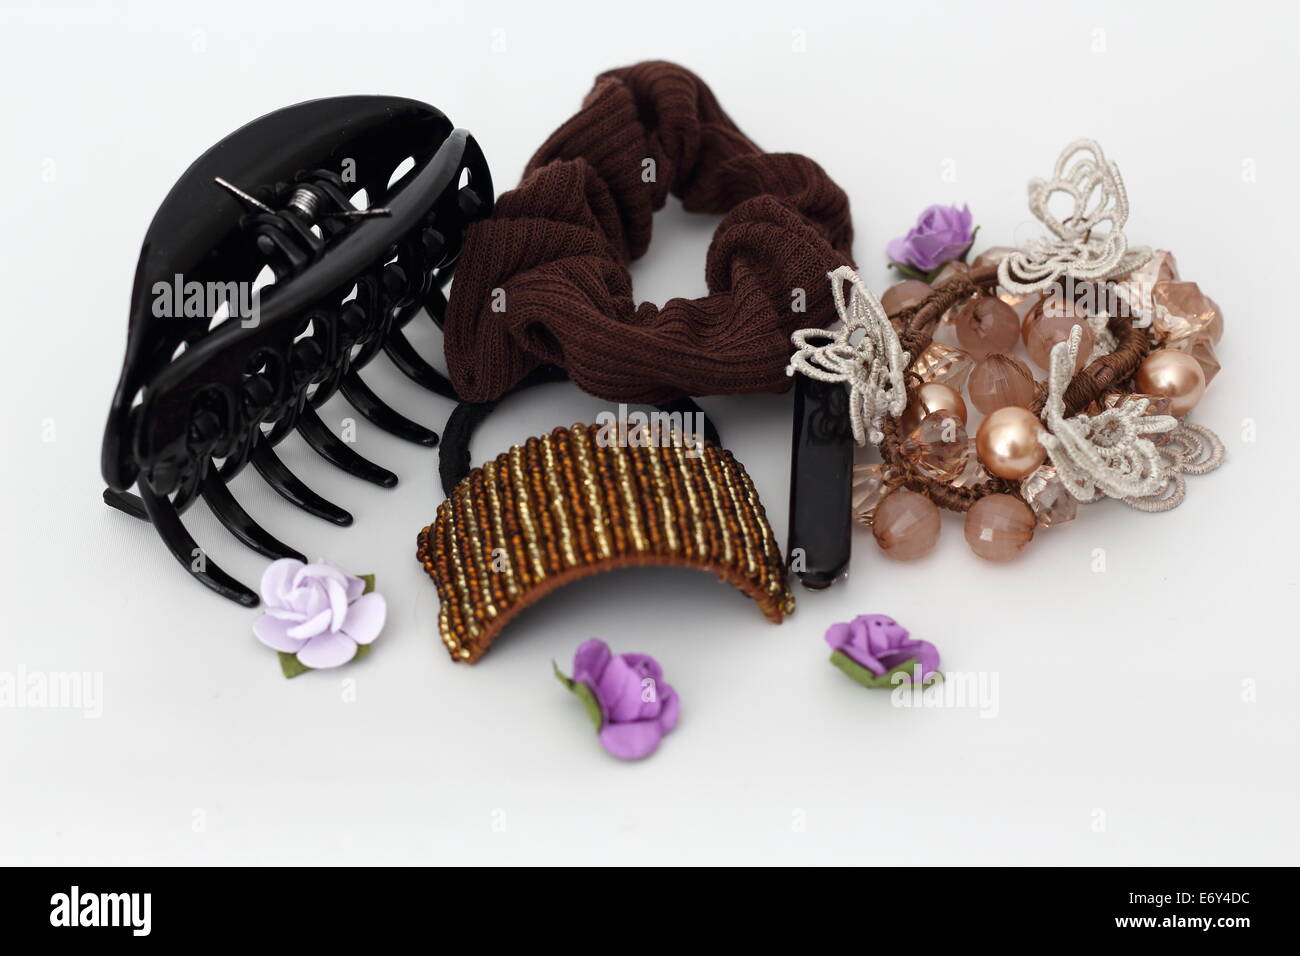 A collection of hair accessories Stock Photo